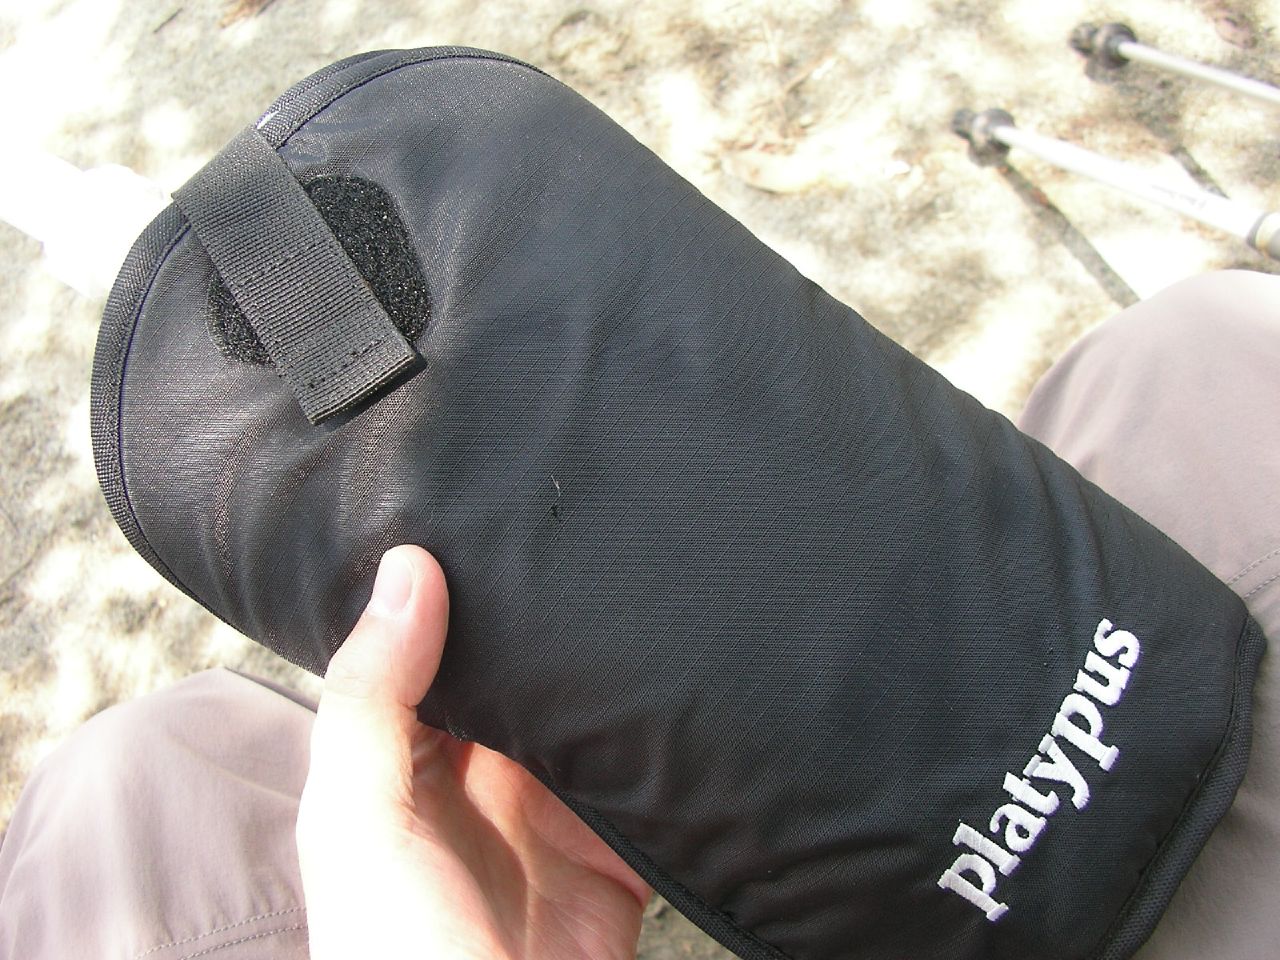 a black pouch in someones hand on the ground